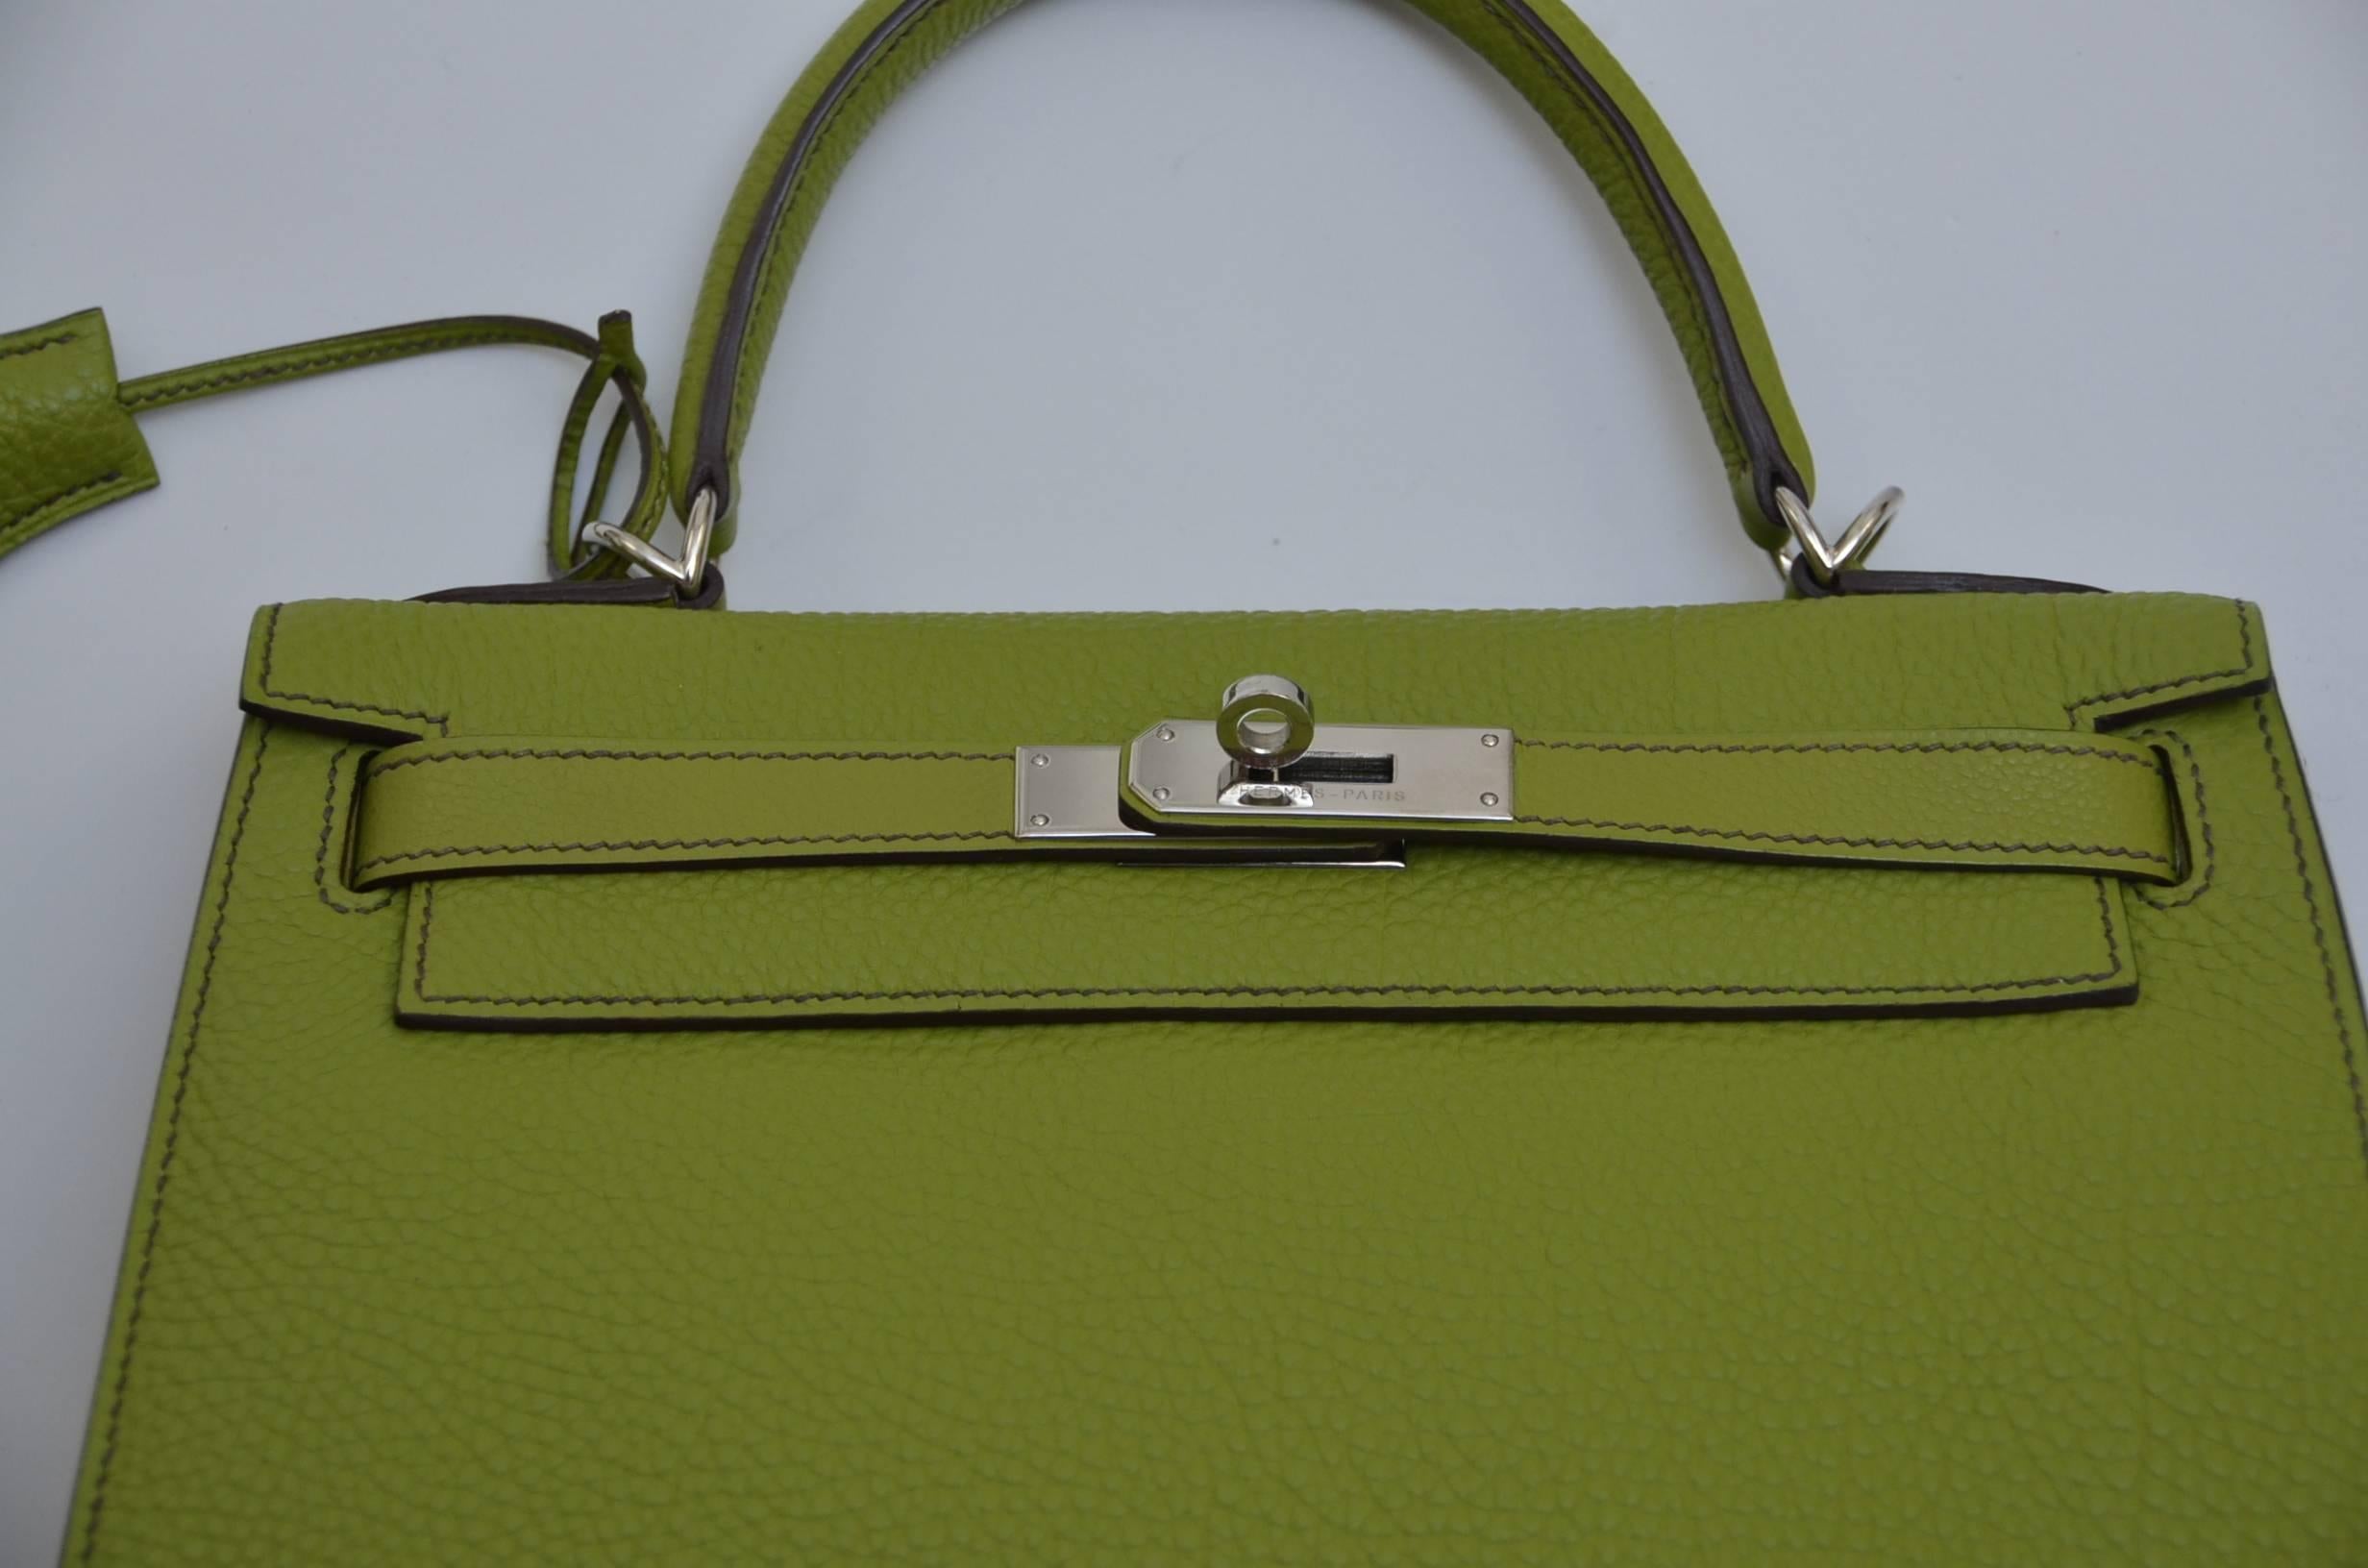 Hermes Kelly 28 cm.
Beautiful green Vert Anis  color in person.Palladium hardware.
Please note:due to camera flashlight color might look slightly different in person and closest color match is on the last picture where bag is photographed on the